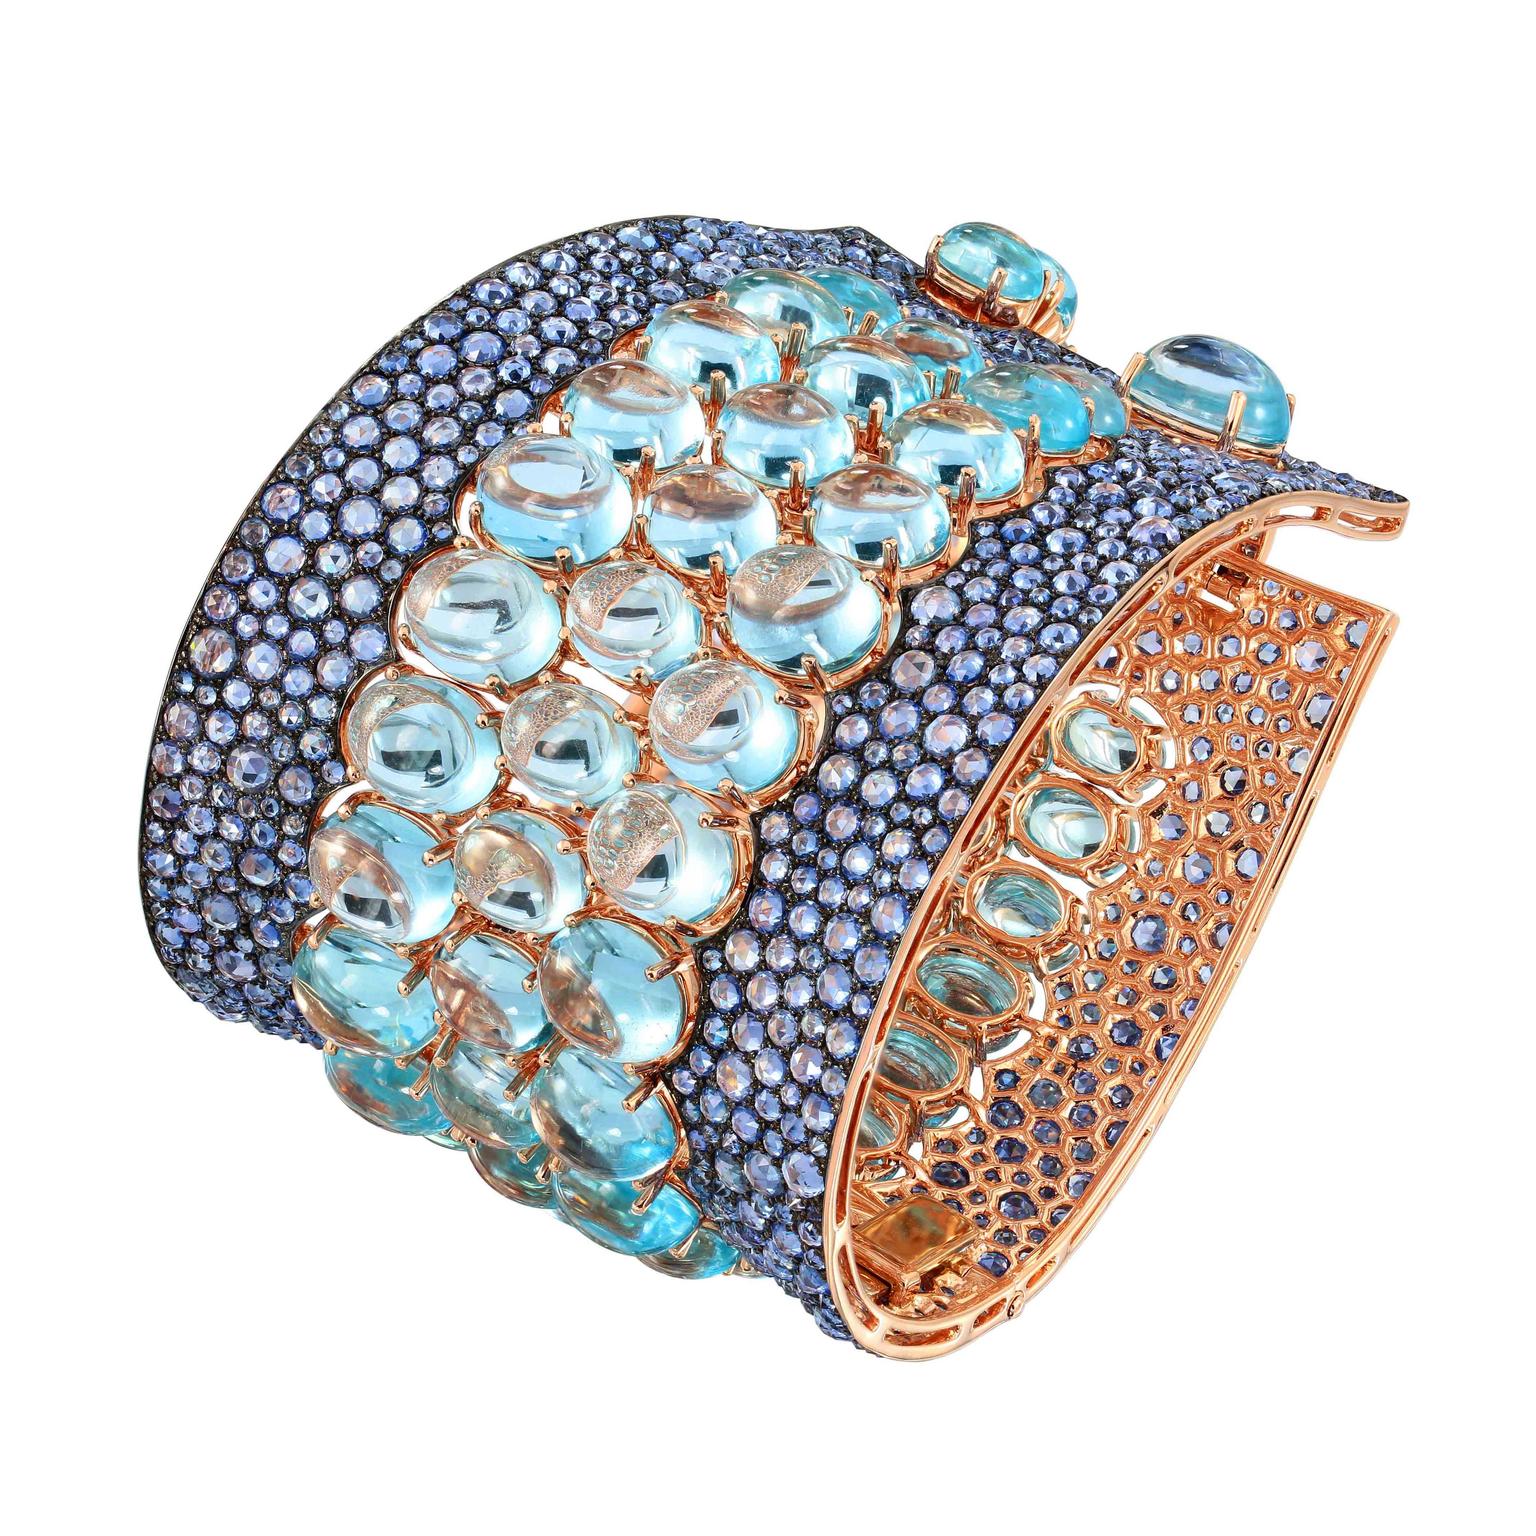 Etho Maria topaz and sapphire bracelet in rose gold